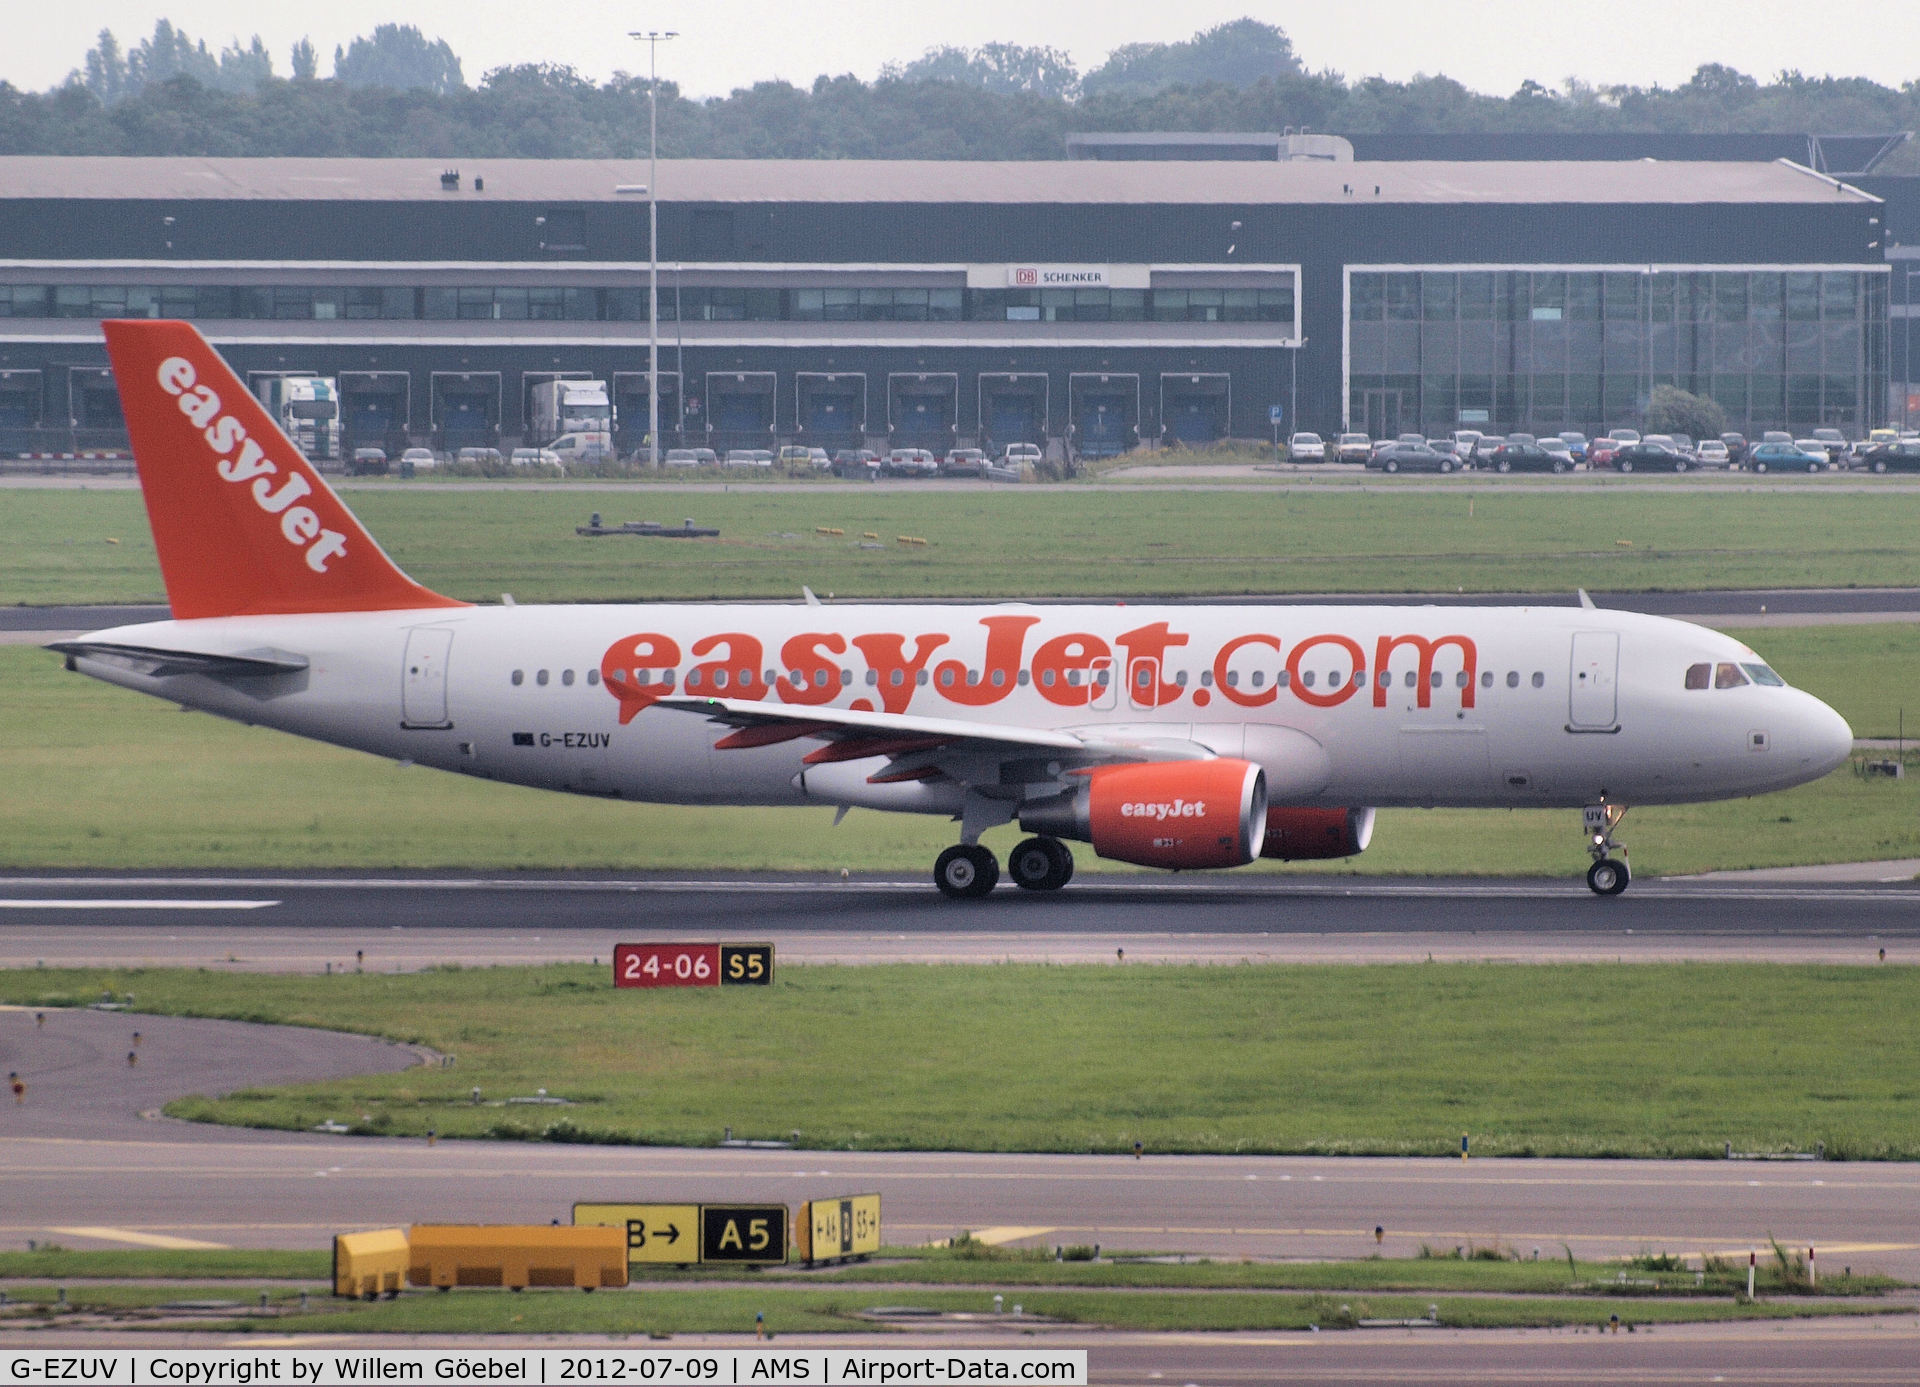 G-EZUV, 2012 Airbus A320-214 C/N 5111, Taxi to runway 24 of Schiphol Airport